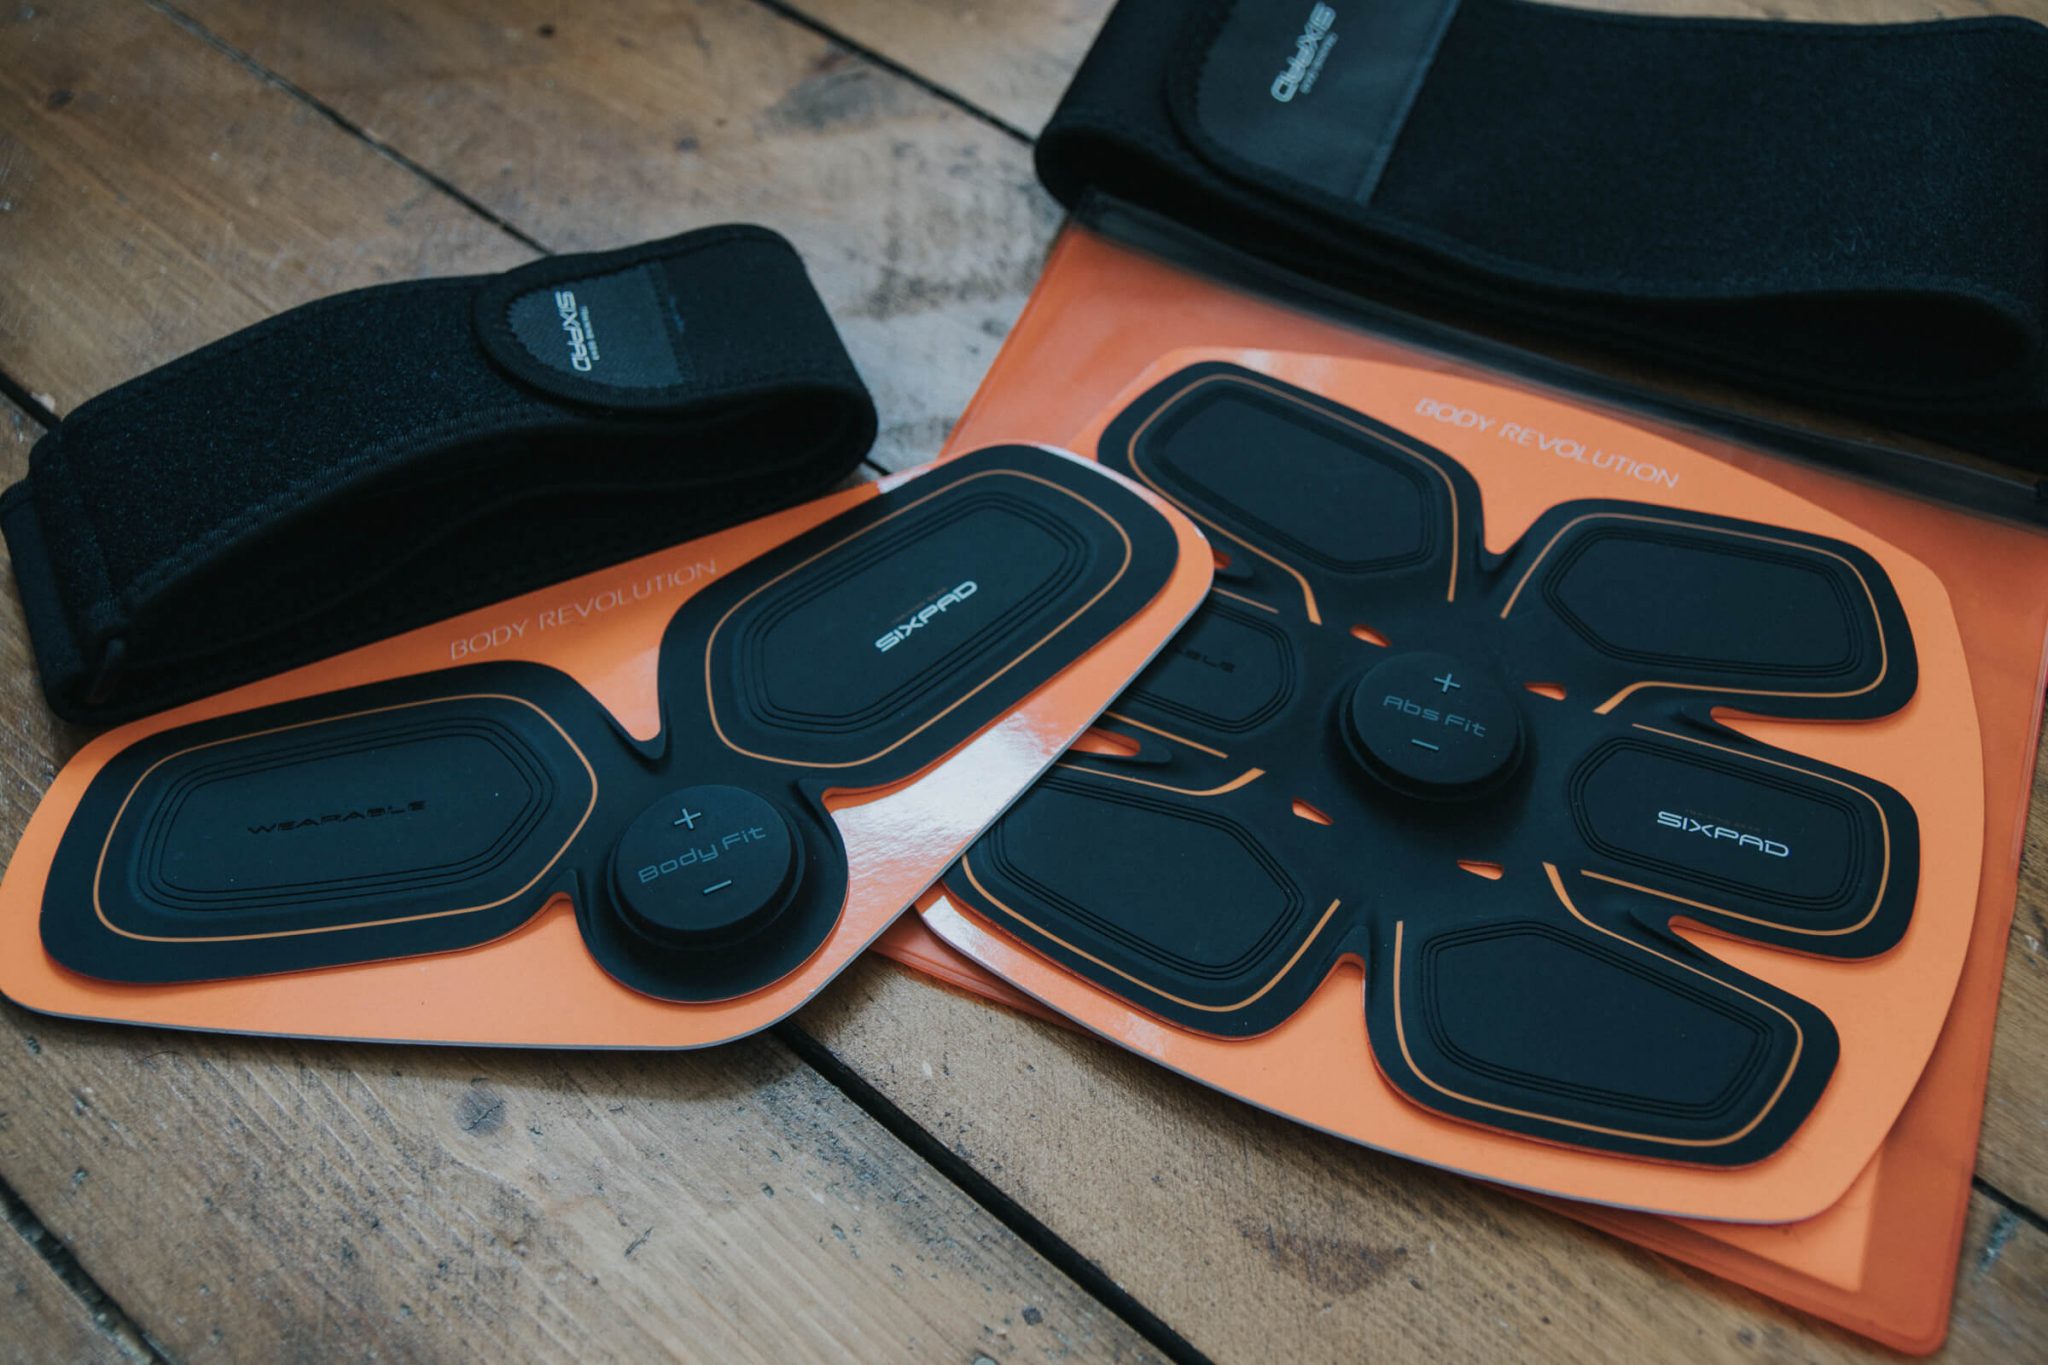 Sixpad Review - The Solution To Getting Abs? - I'm Peter